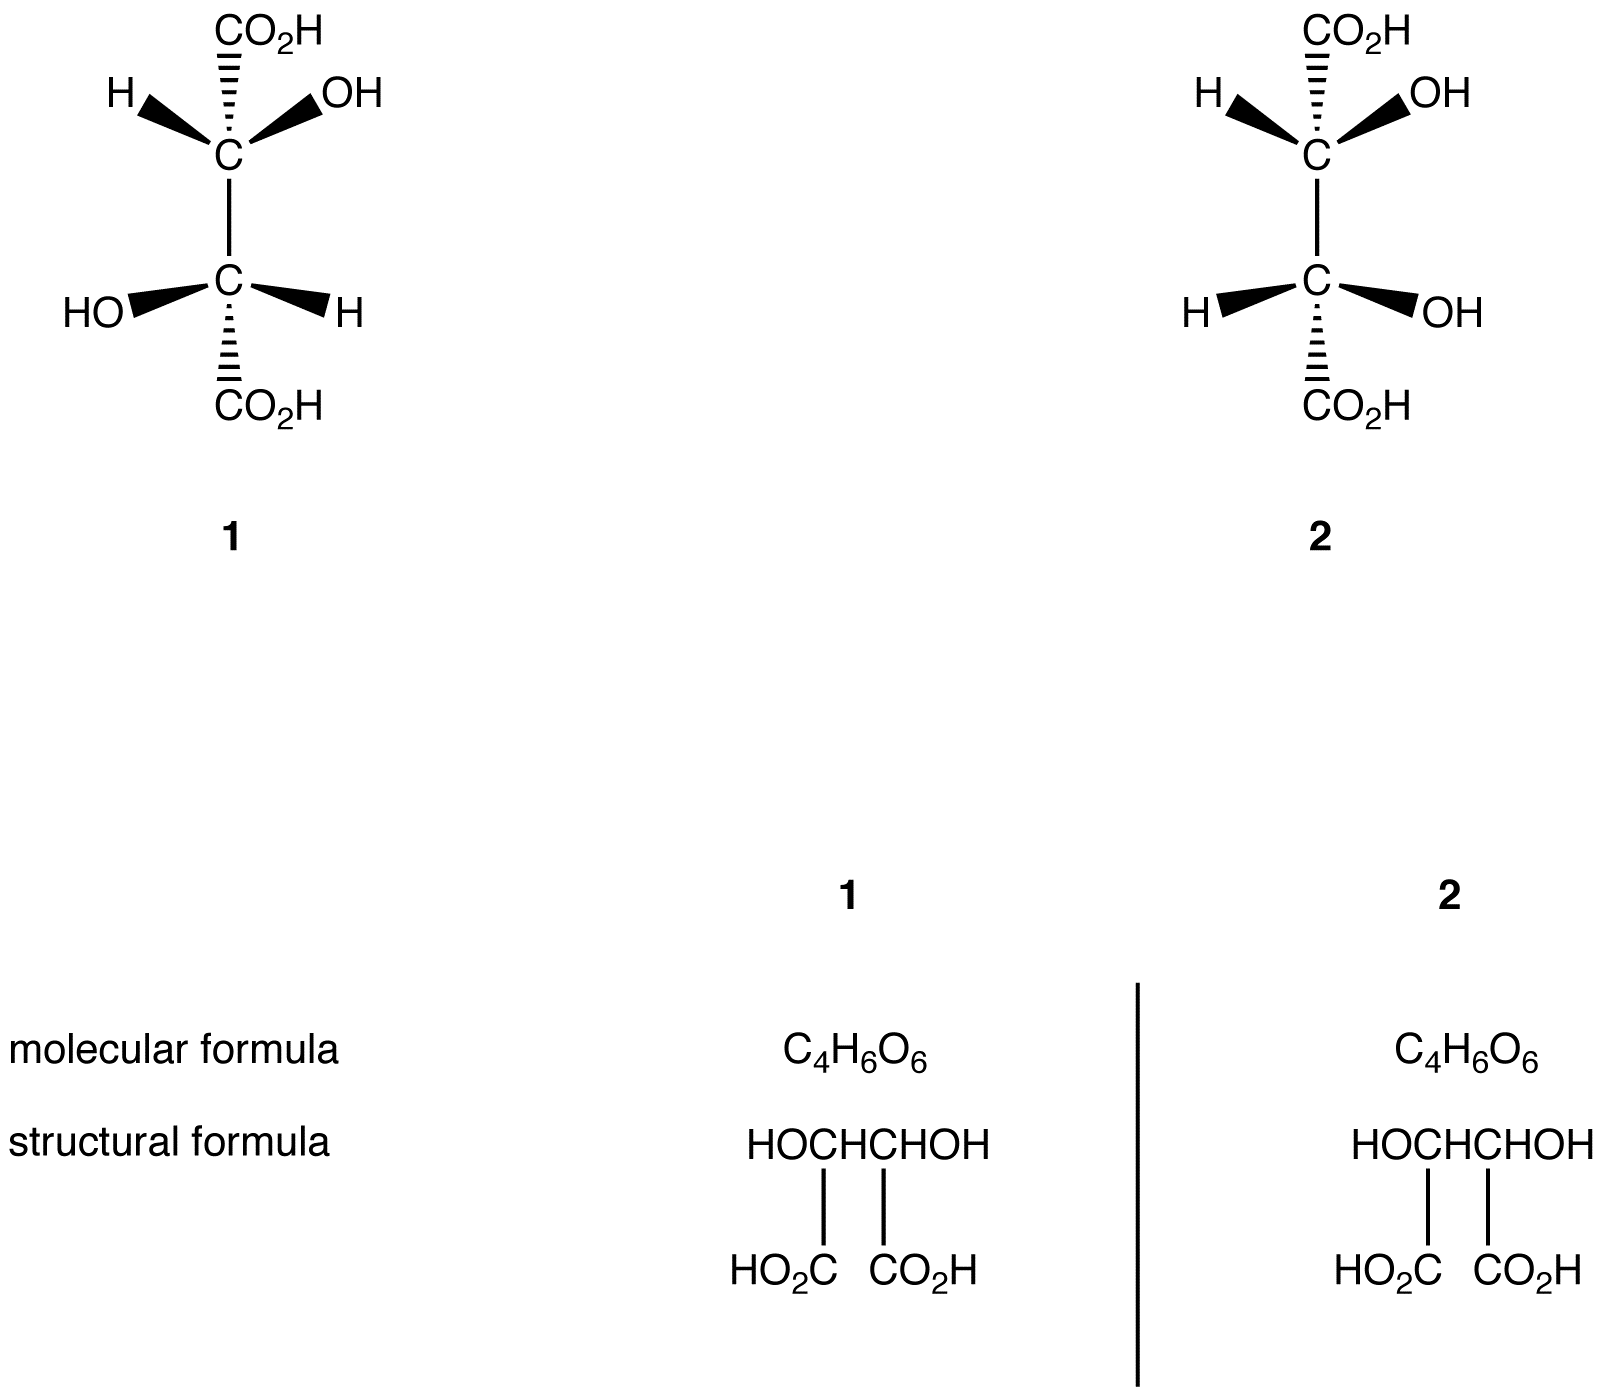 diastereomers1.png